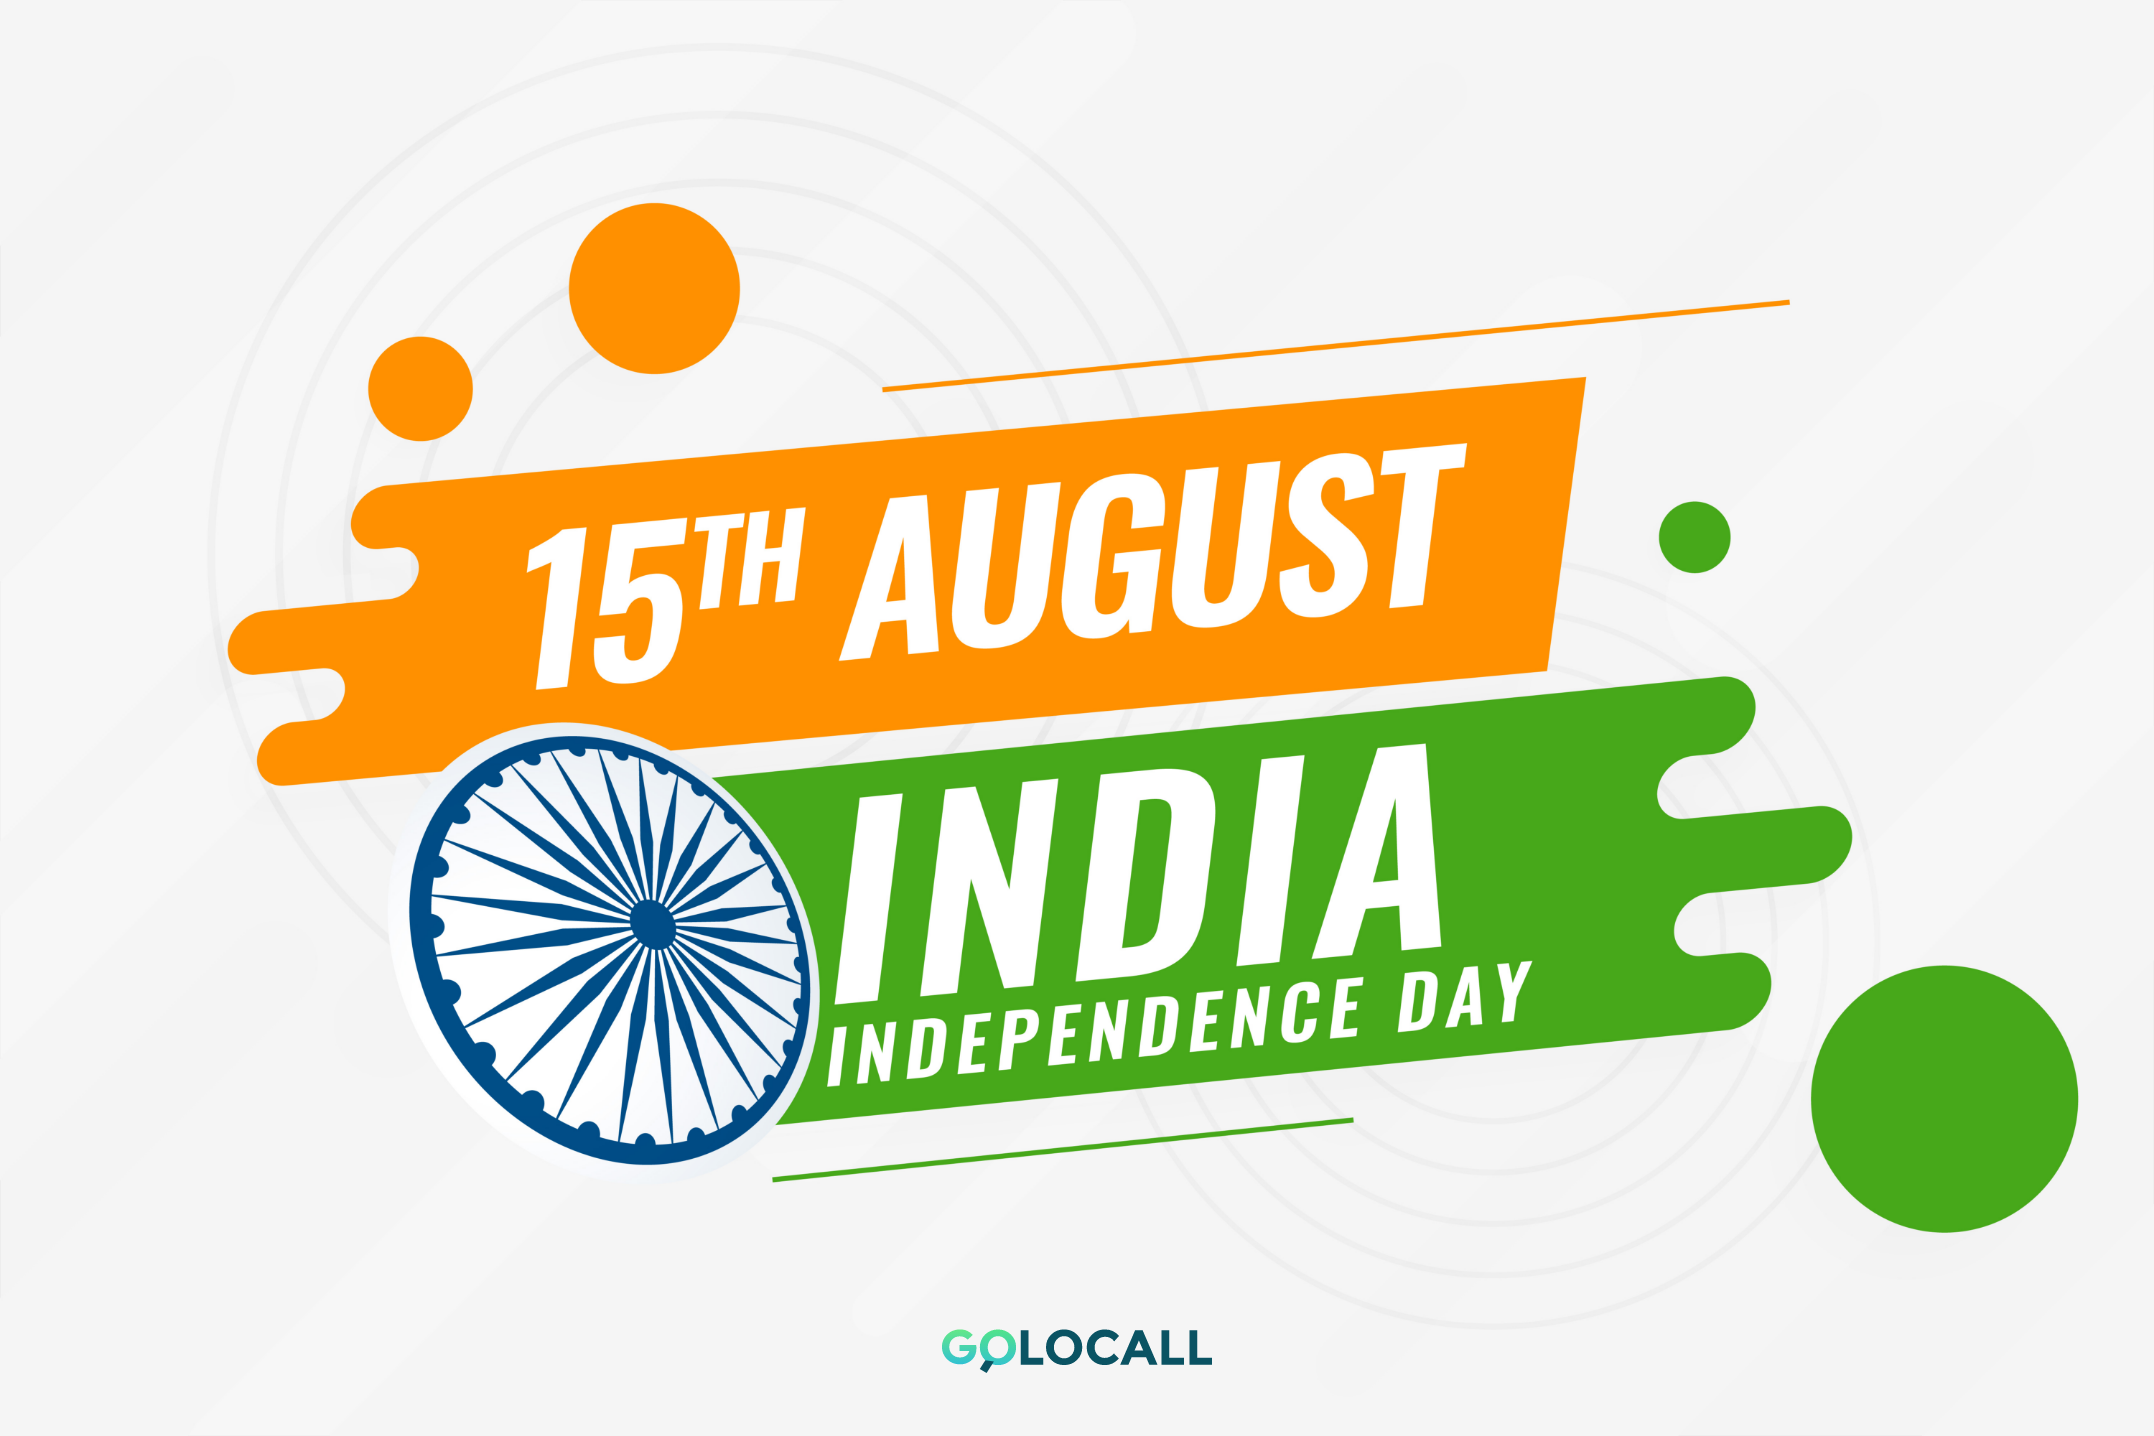 Wish you a very Happy Independence Day | GoLocall Web Services Private Limited | FreedomToProgress, HappyIndependenceDay, IndiaAt75 - GL106926